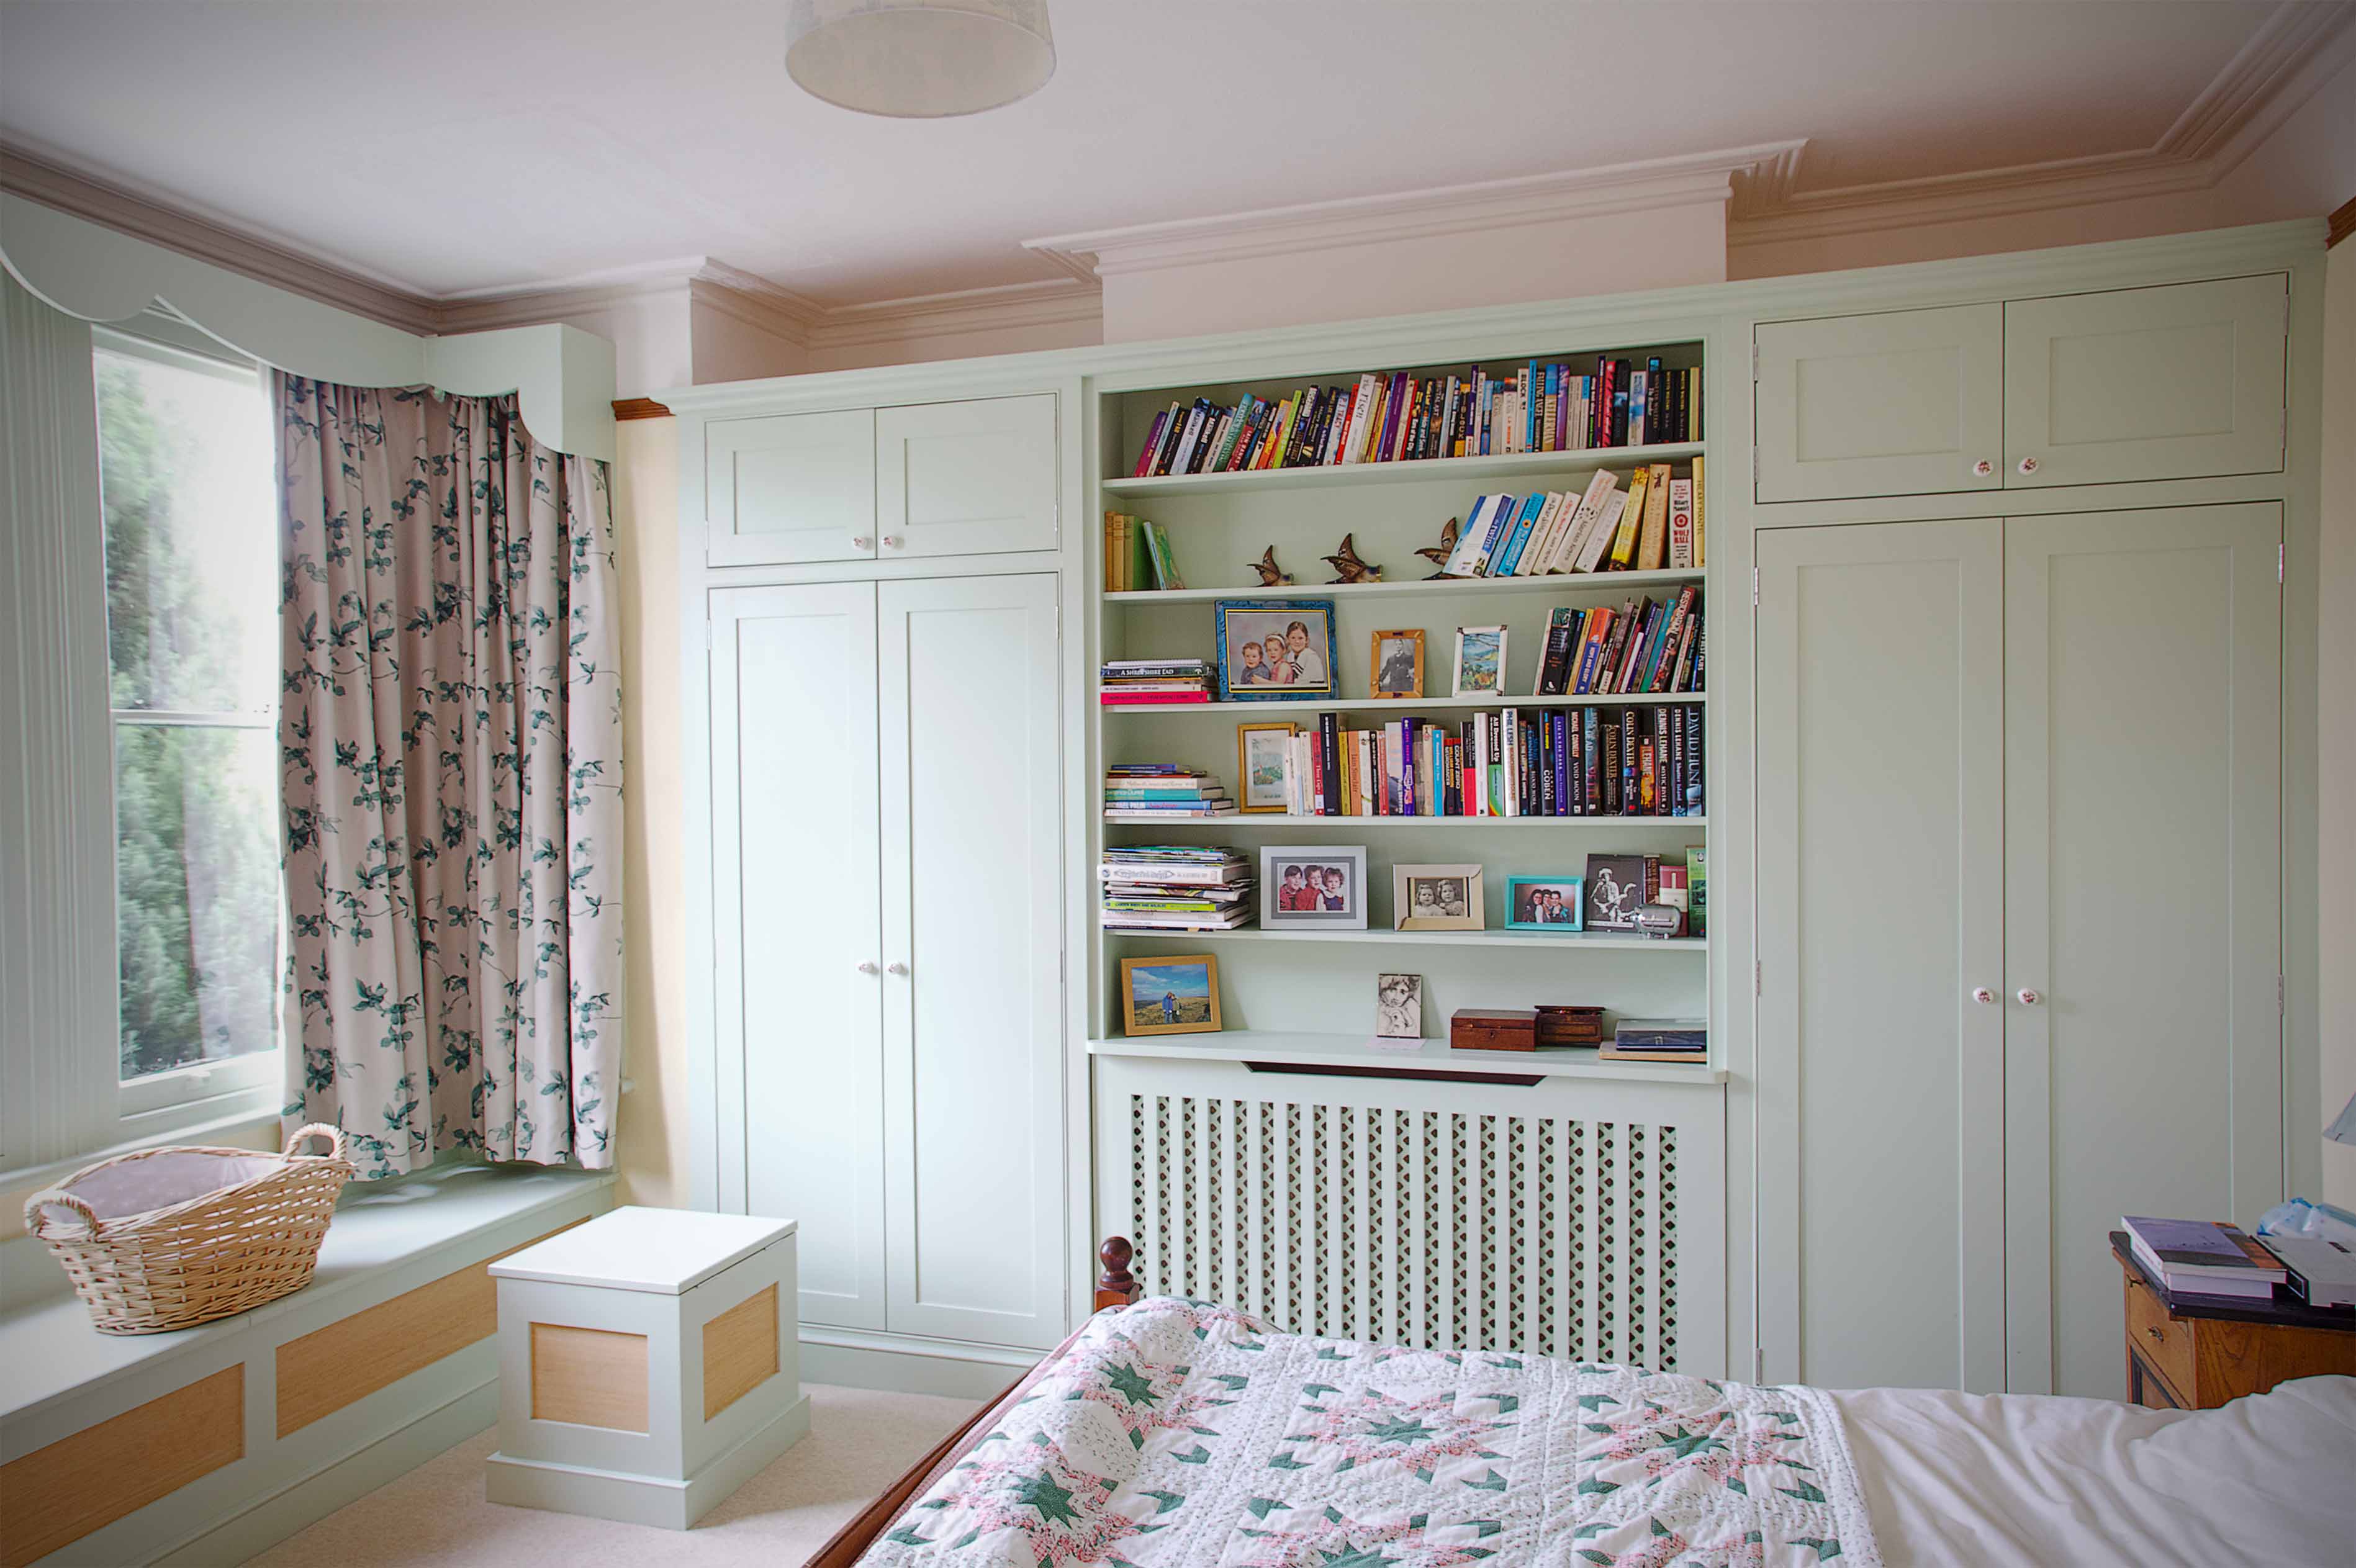 001. Bespoke fitted wardrobes his hers dressing room mylands farrow and ball armac martin near Winchester Hampshire